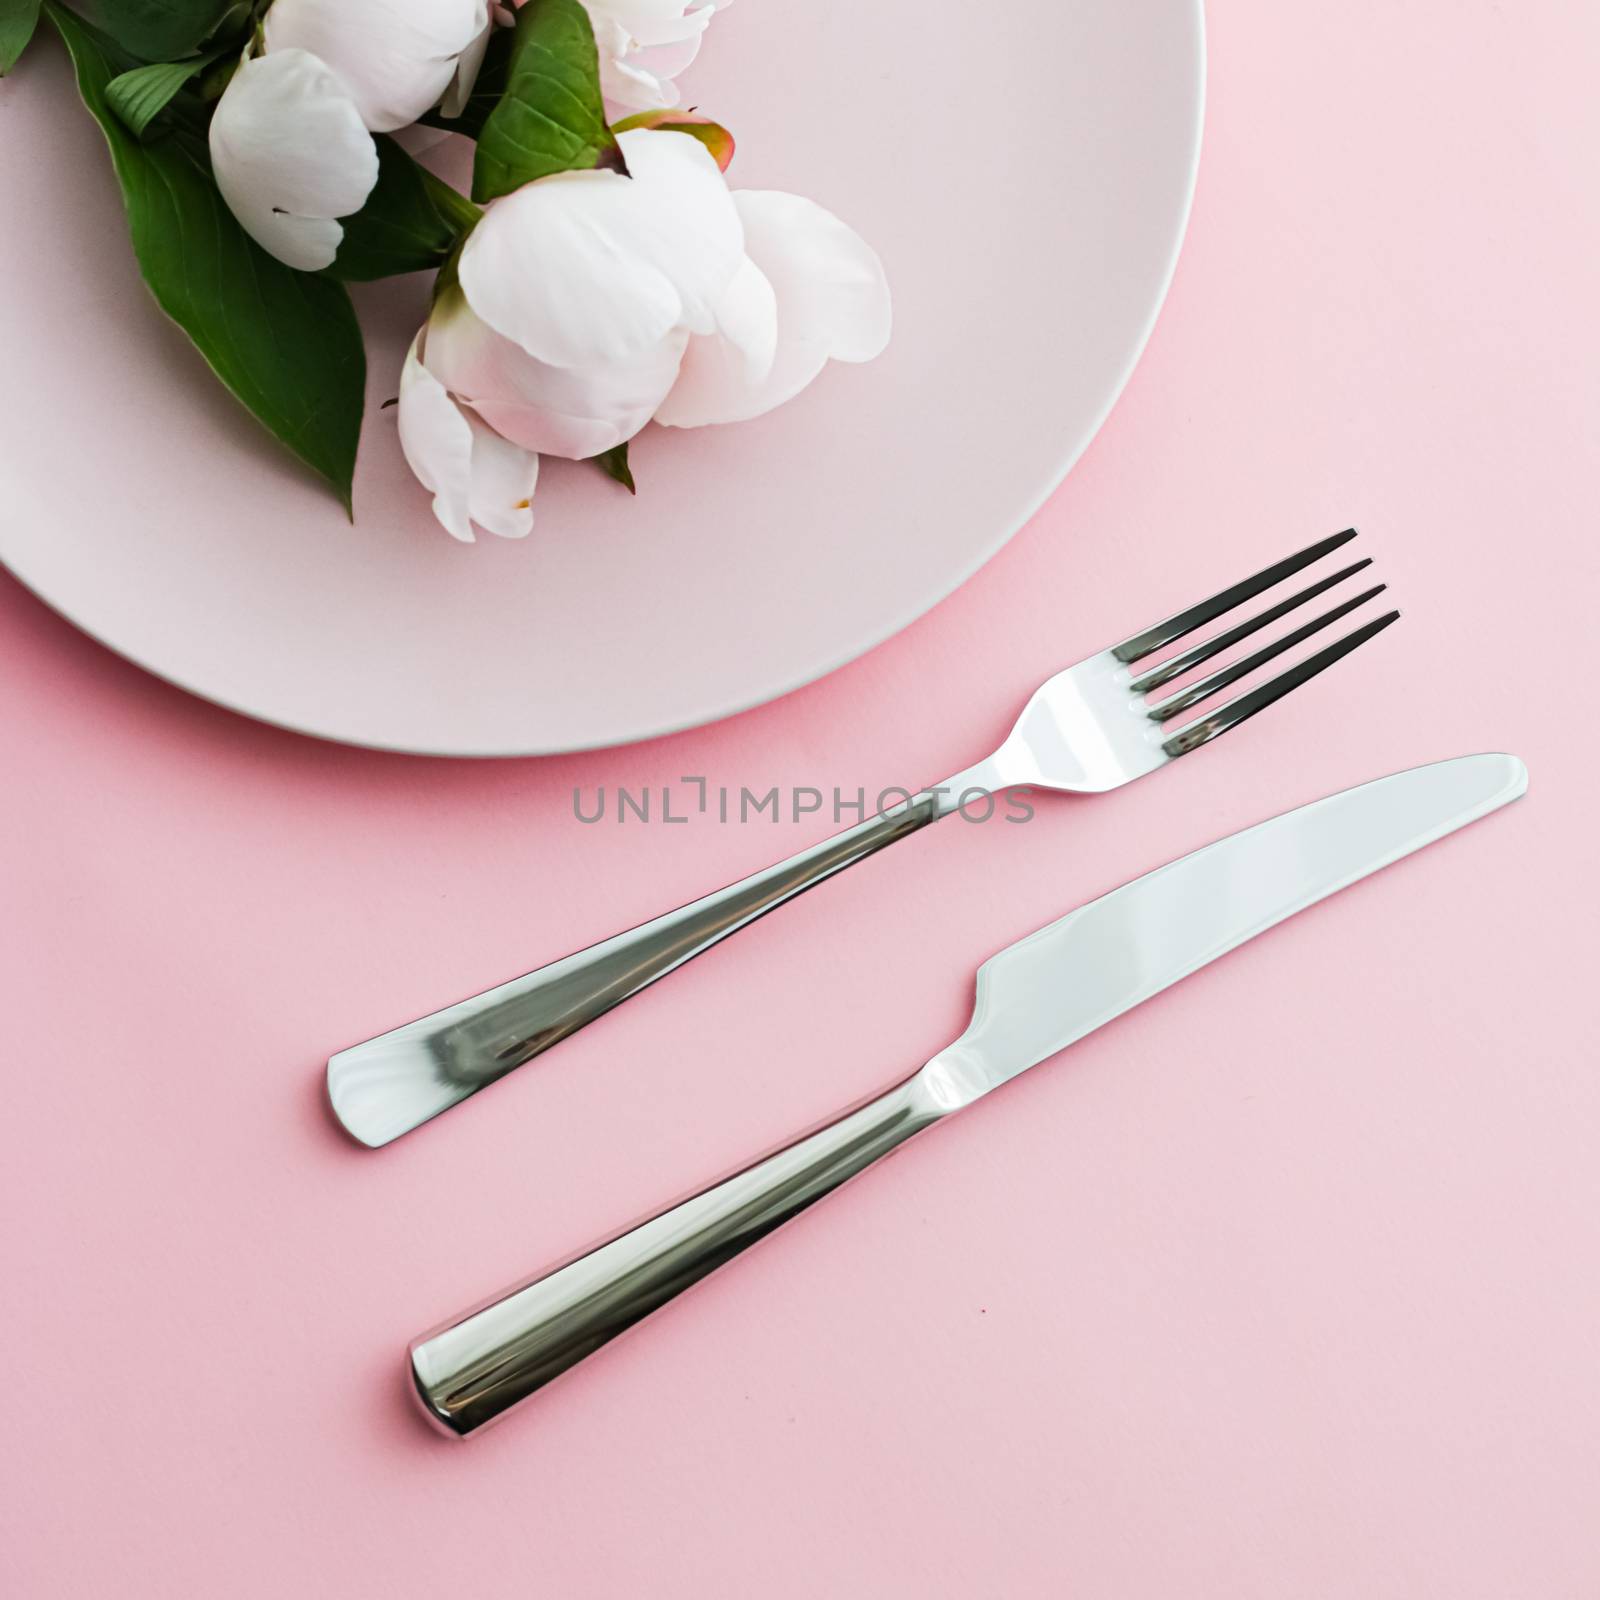 Dining plate and cutlery with peony flowers as wedding decor set on pink background, top tableware for event decoration and menu branding design